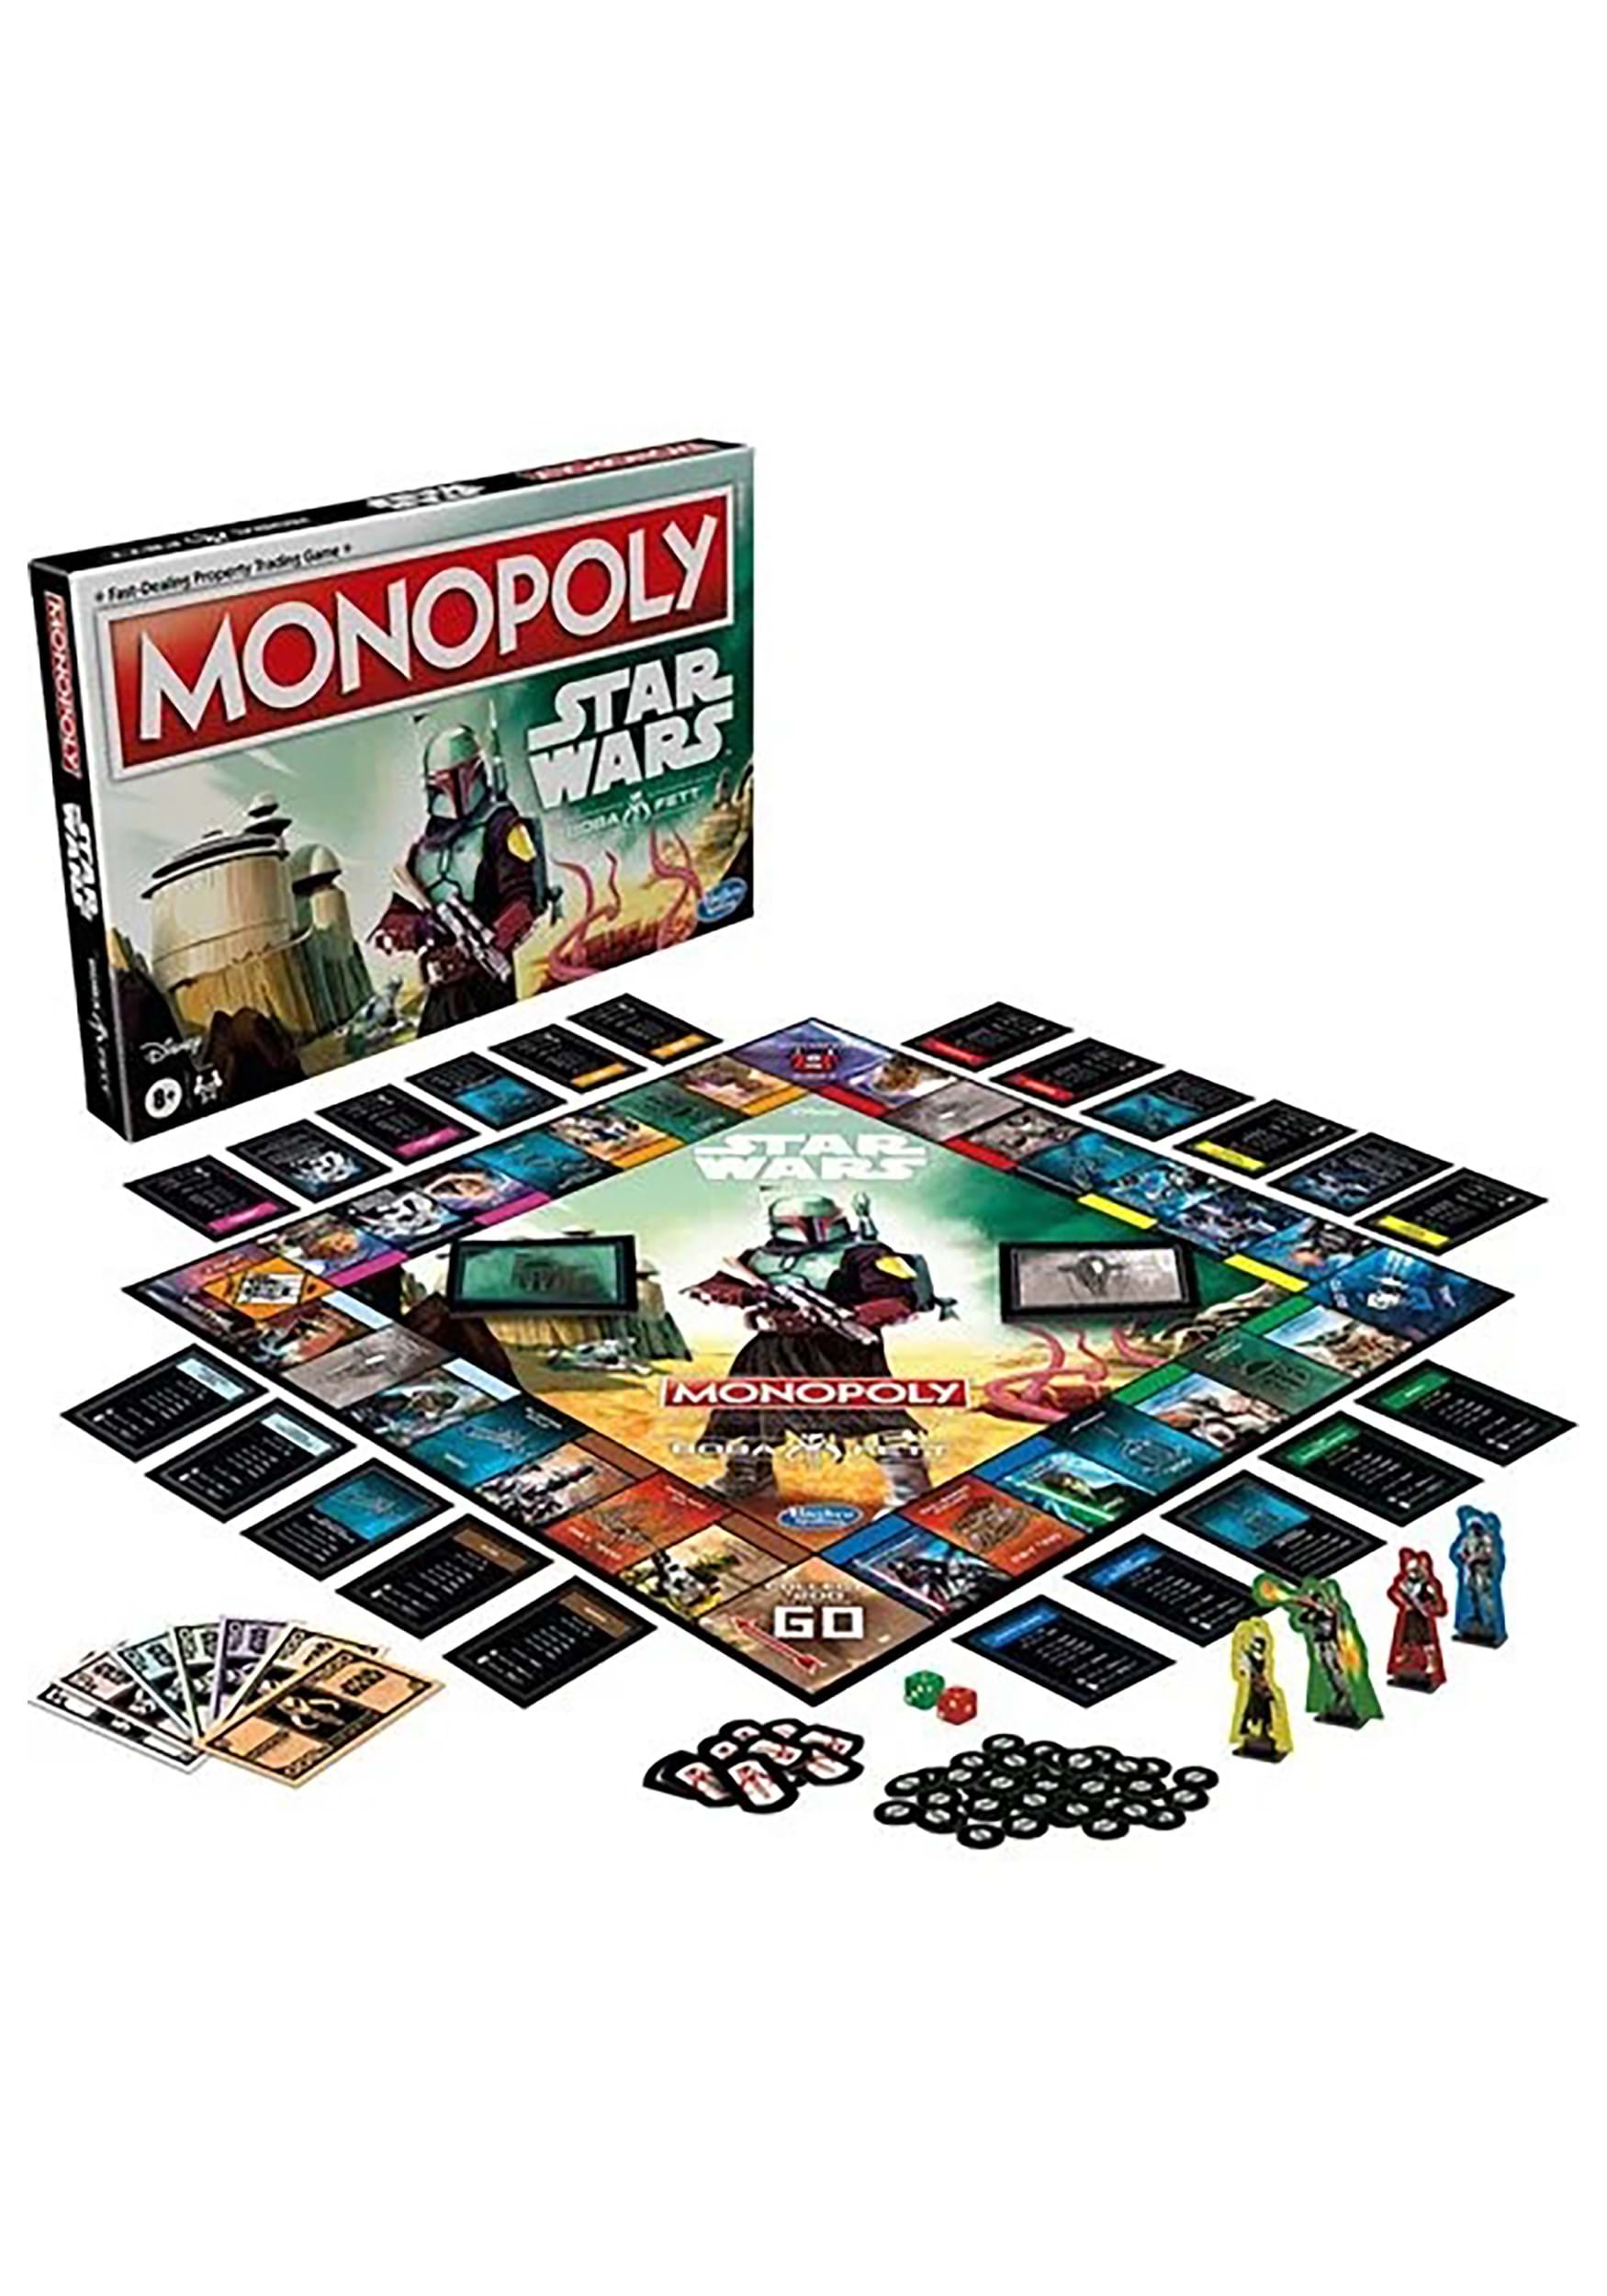 Monopoly Teenage Mutant Ninja Turtles Board Game for Kids and Family Ages 8  and Up, 2-4 Players